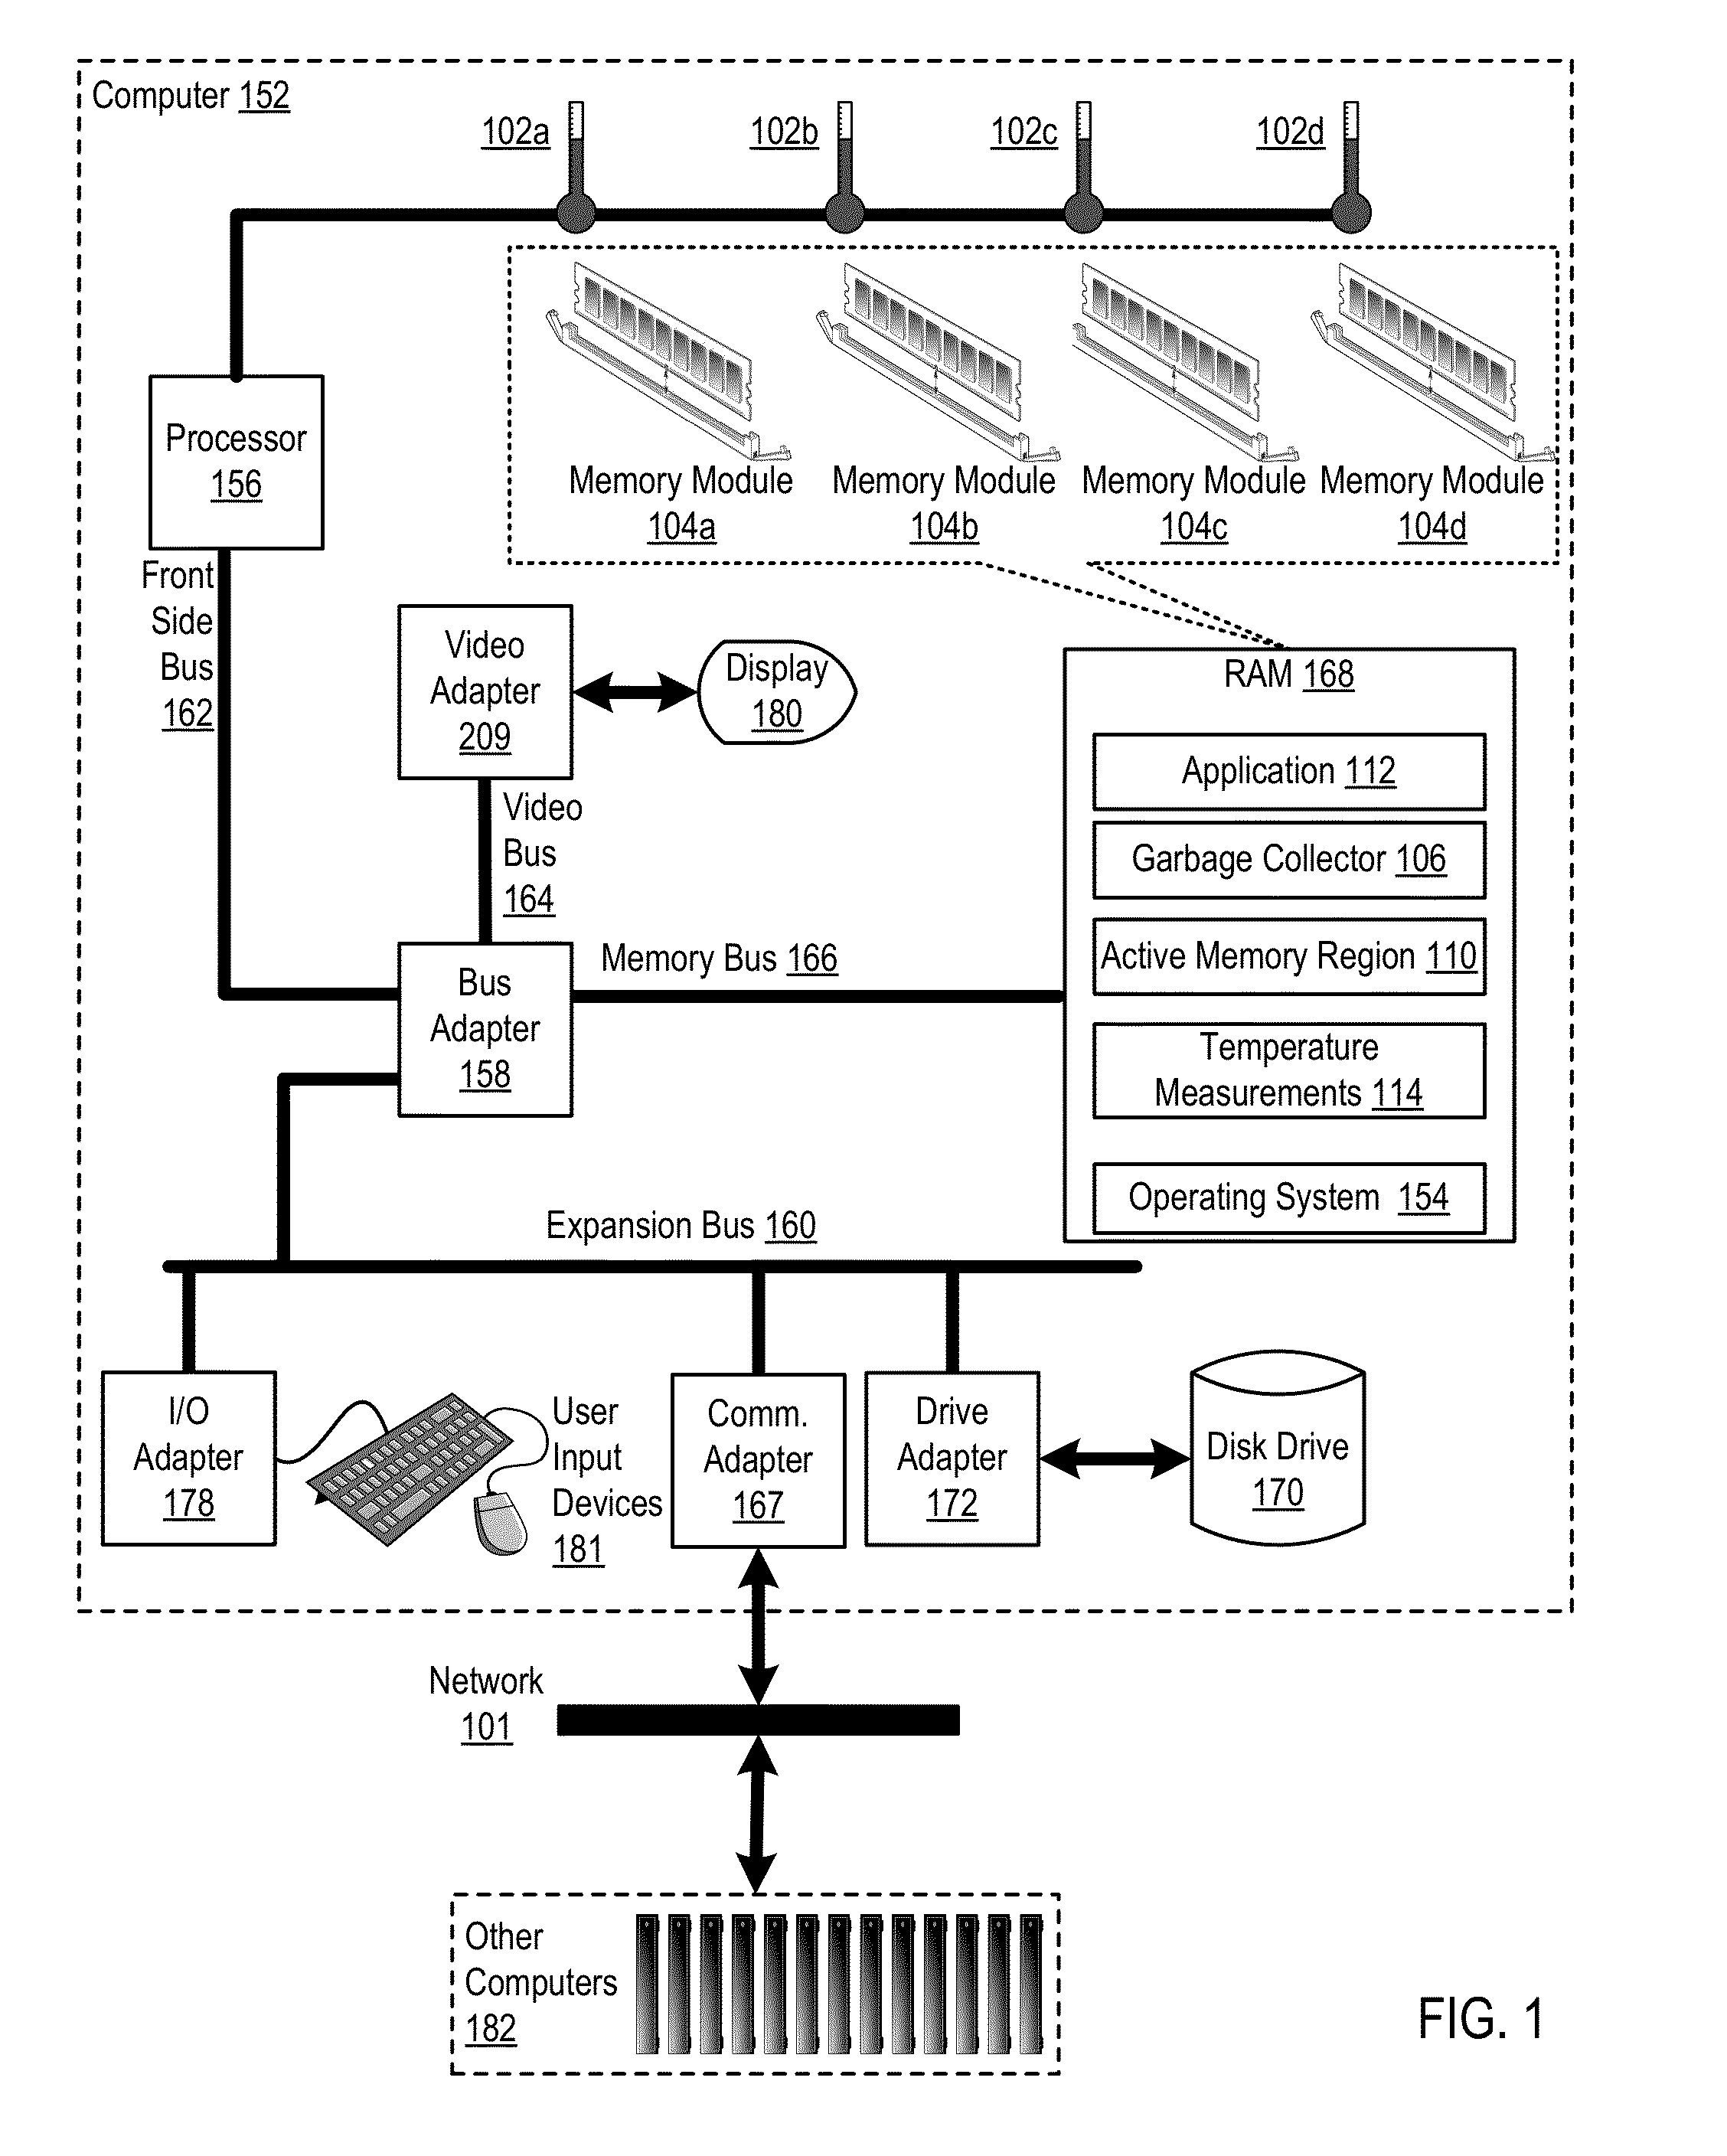 Administering Thermal Distribution Among Memory Modules Of A Computing System